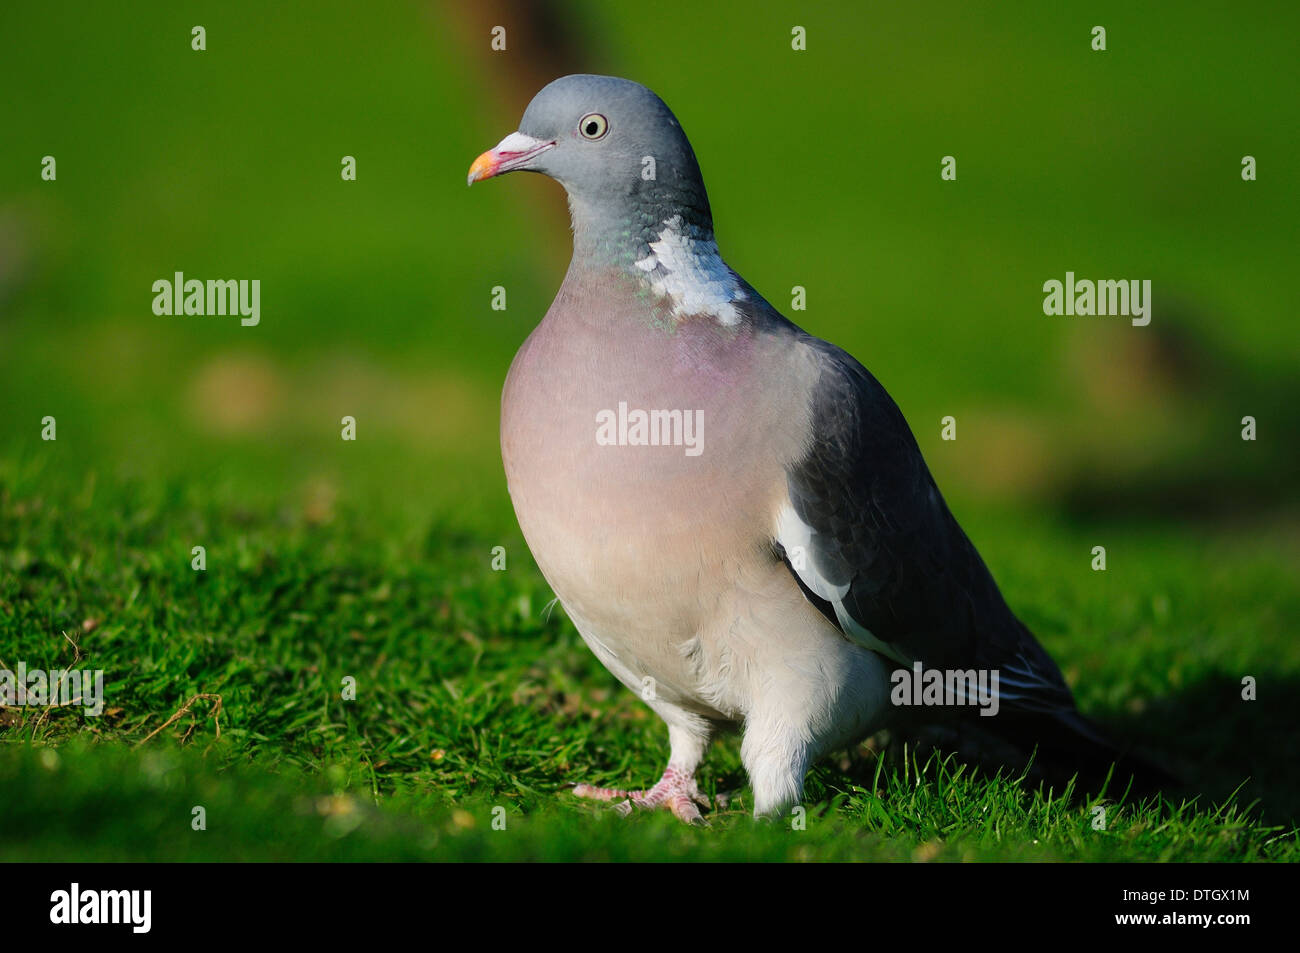 One woodpigeon pigeon on the ground in a field UK Stock Photo